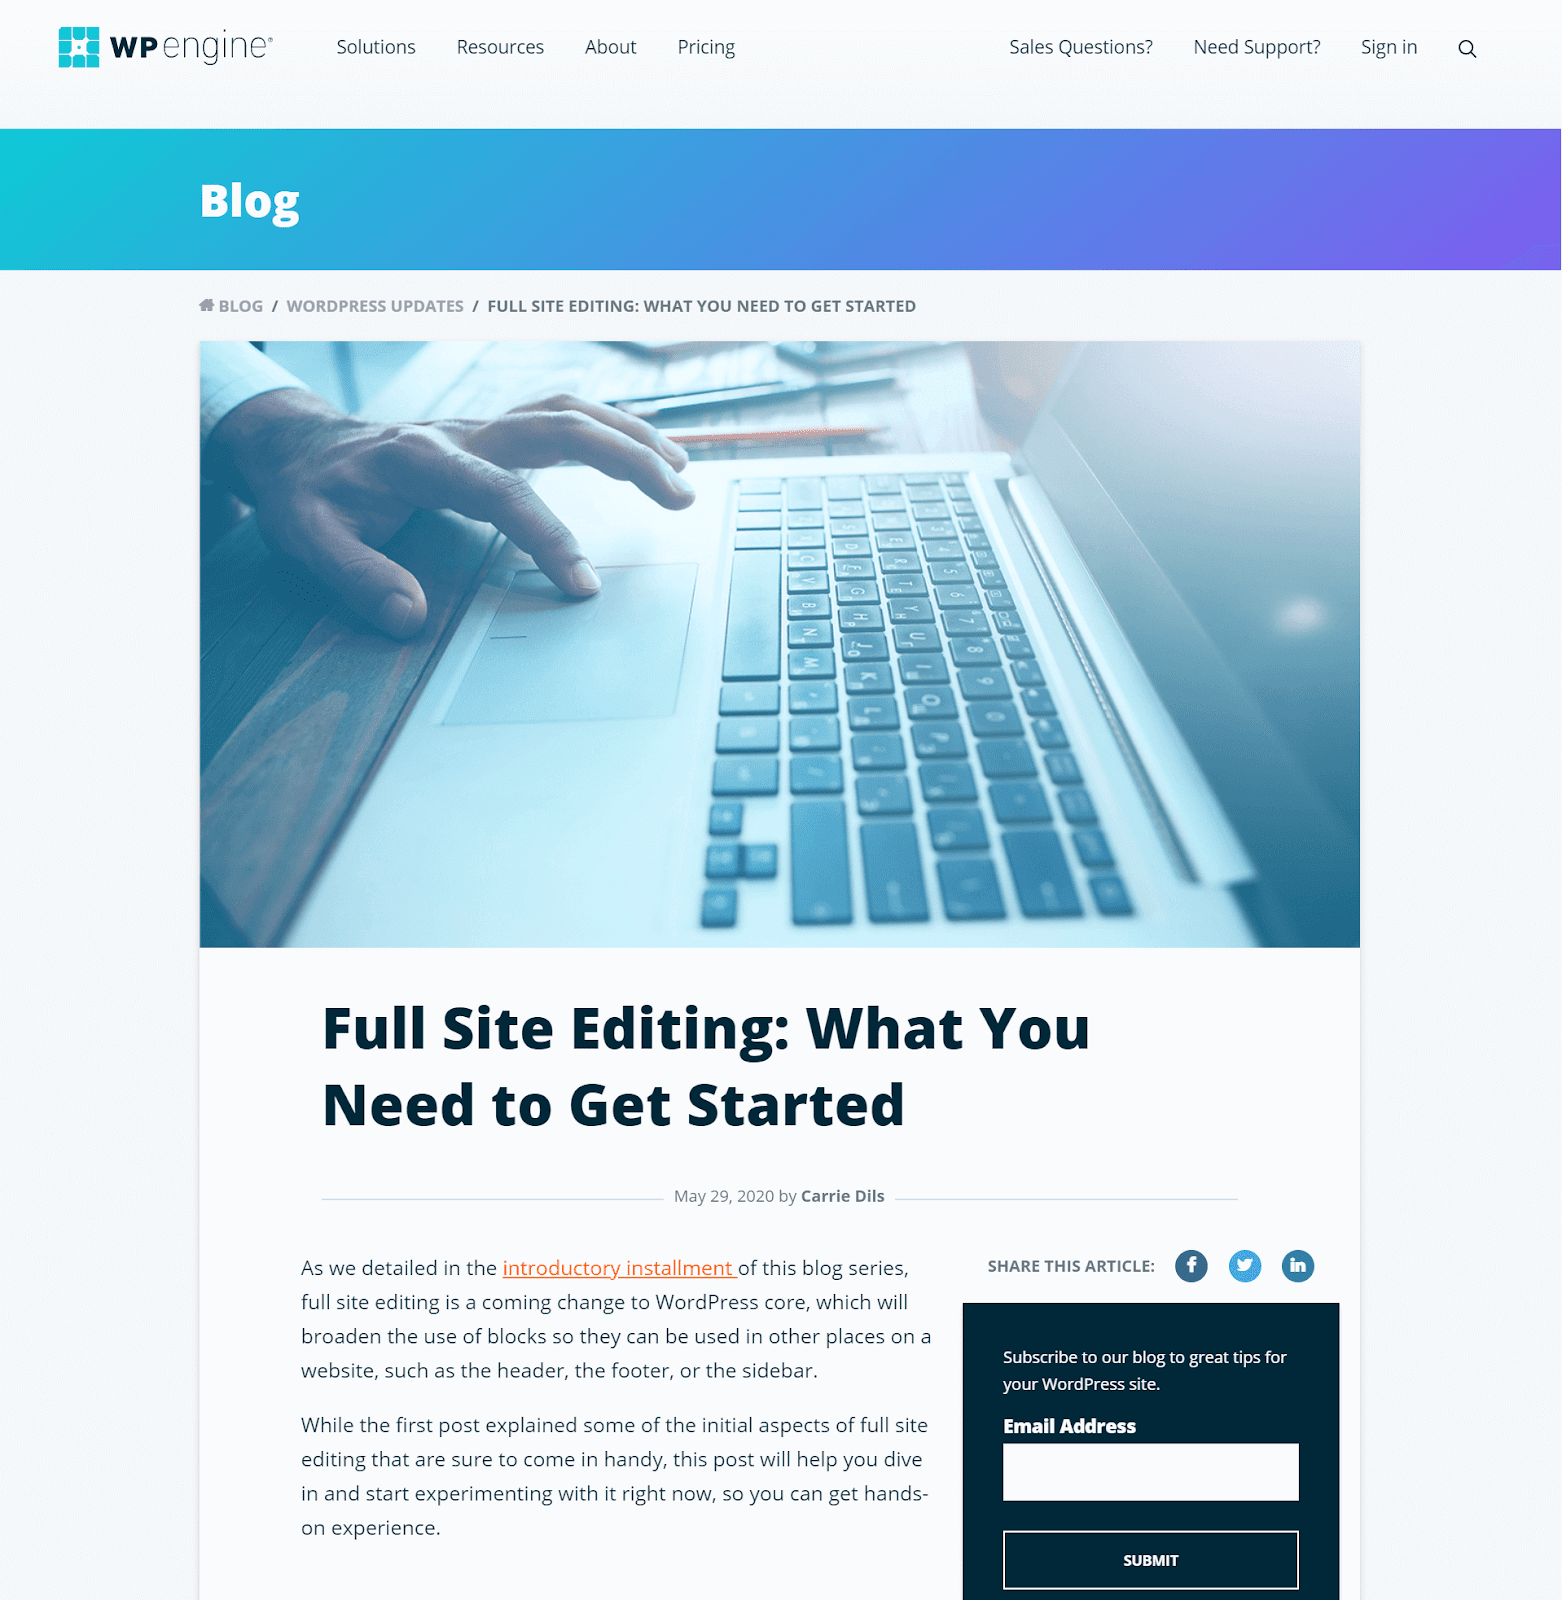 A WP Engine article, titled "Full Site Editing: What You Need to Get Started"